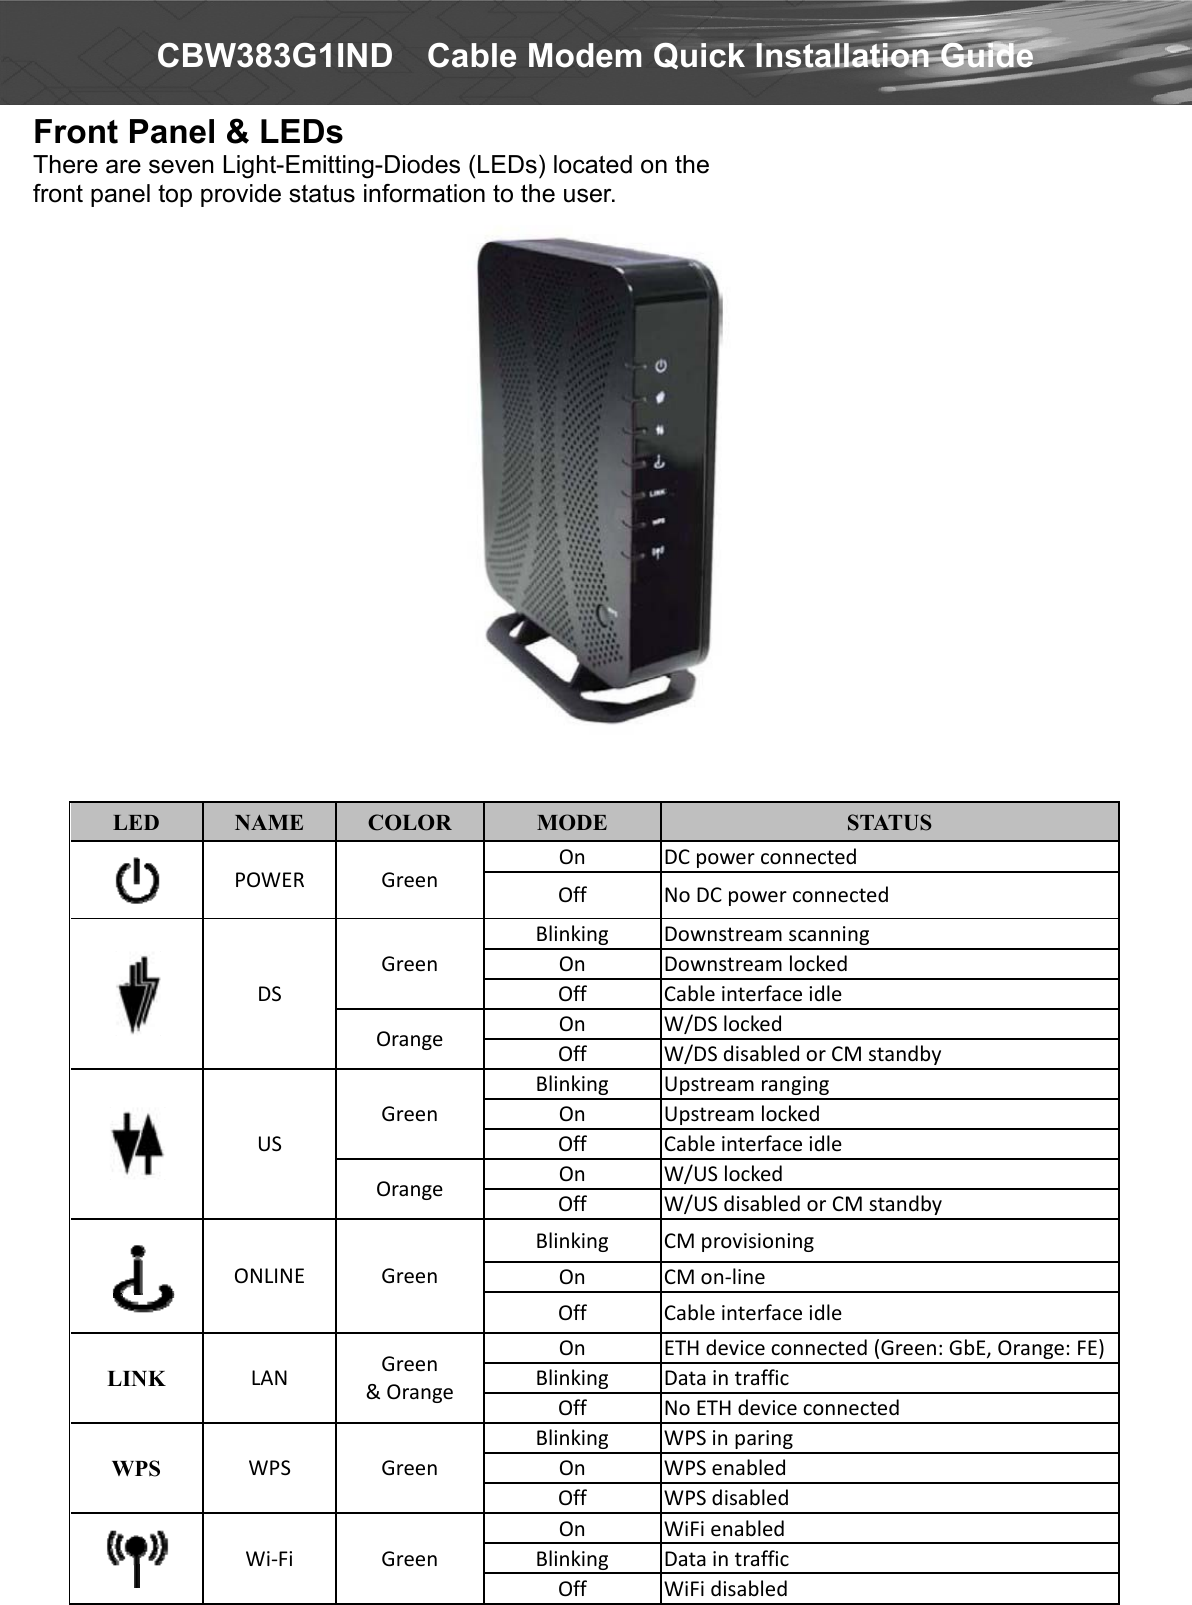  CBW383G1IND    Cable Modem Quick Installation Guide Front Panel &amp; LEDs There are seven Light-Emitting-Diodes (LEDs) located on the   front panel top provide status information to the user.    LED  NAME  COLOR  MODE  STATUS  POWERGreenOnDCpowerconnectedOffNoDCpowerconnected       DSGreenBlinkingDownstreamscanningOnDownstreamlockedOffCableinterfaceidleOrangeOnW/DSlockedOffW/DSdisabledorCMstandby       USGreenBlinkingUpstreamrangingOnUpstreamlockedOffCableinterfaceidleOrangeOnW/USlockedOffW/USdisabledorCMstandby  ONLINEGreenBlinkingCMprovisioningOnCMon‐lineOffCableinterfaceidleLINK  LANGreen&amp;OrangeOnETHdeviceconnected(Green:GbE,Orange:FE)BlinkingDataintrafficOffNoETHdeviceconnectedWPS  WPSGreenBlinkingWPSinparingOnWPSenabledOffWPSdisabled Wi‐FiGreenOnWiFienabledBlinkingDataintrafficOffWiFidisabled   